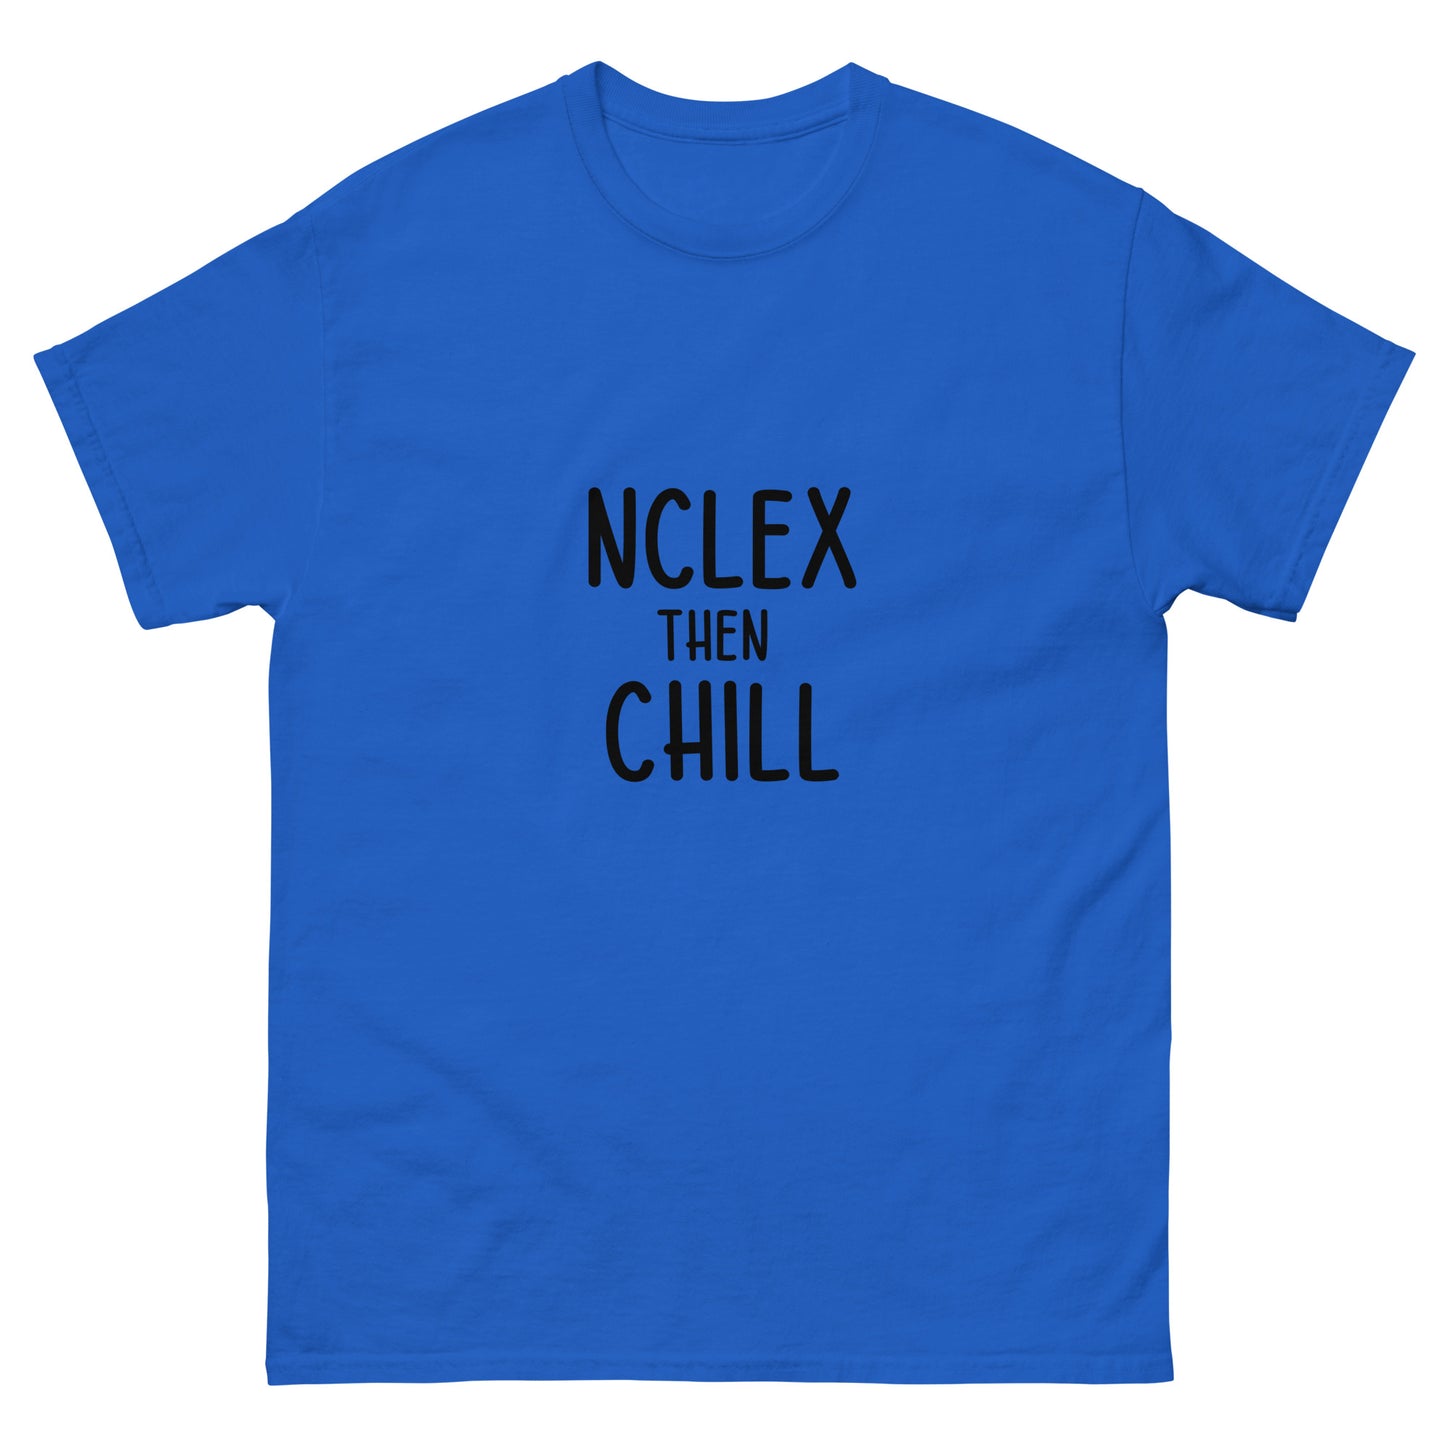 NCLEX and chill classic tee